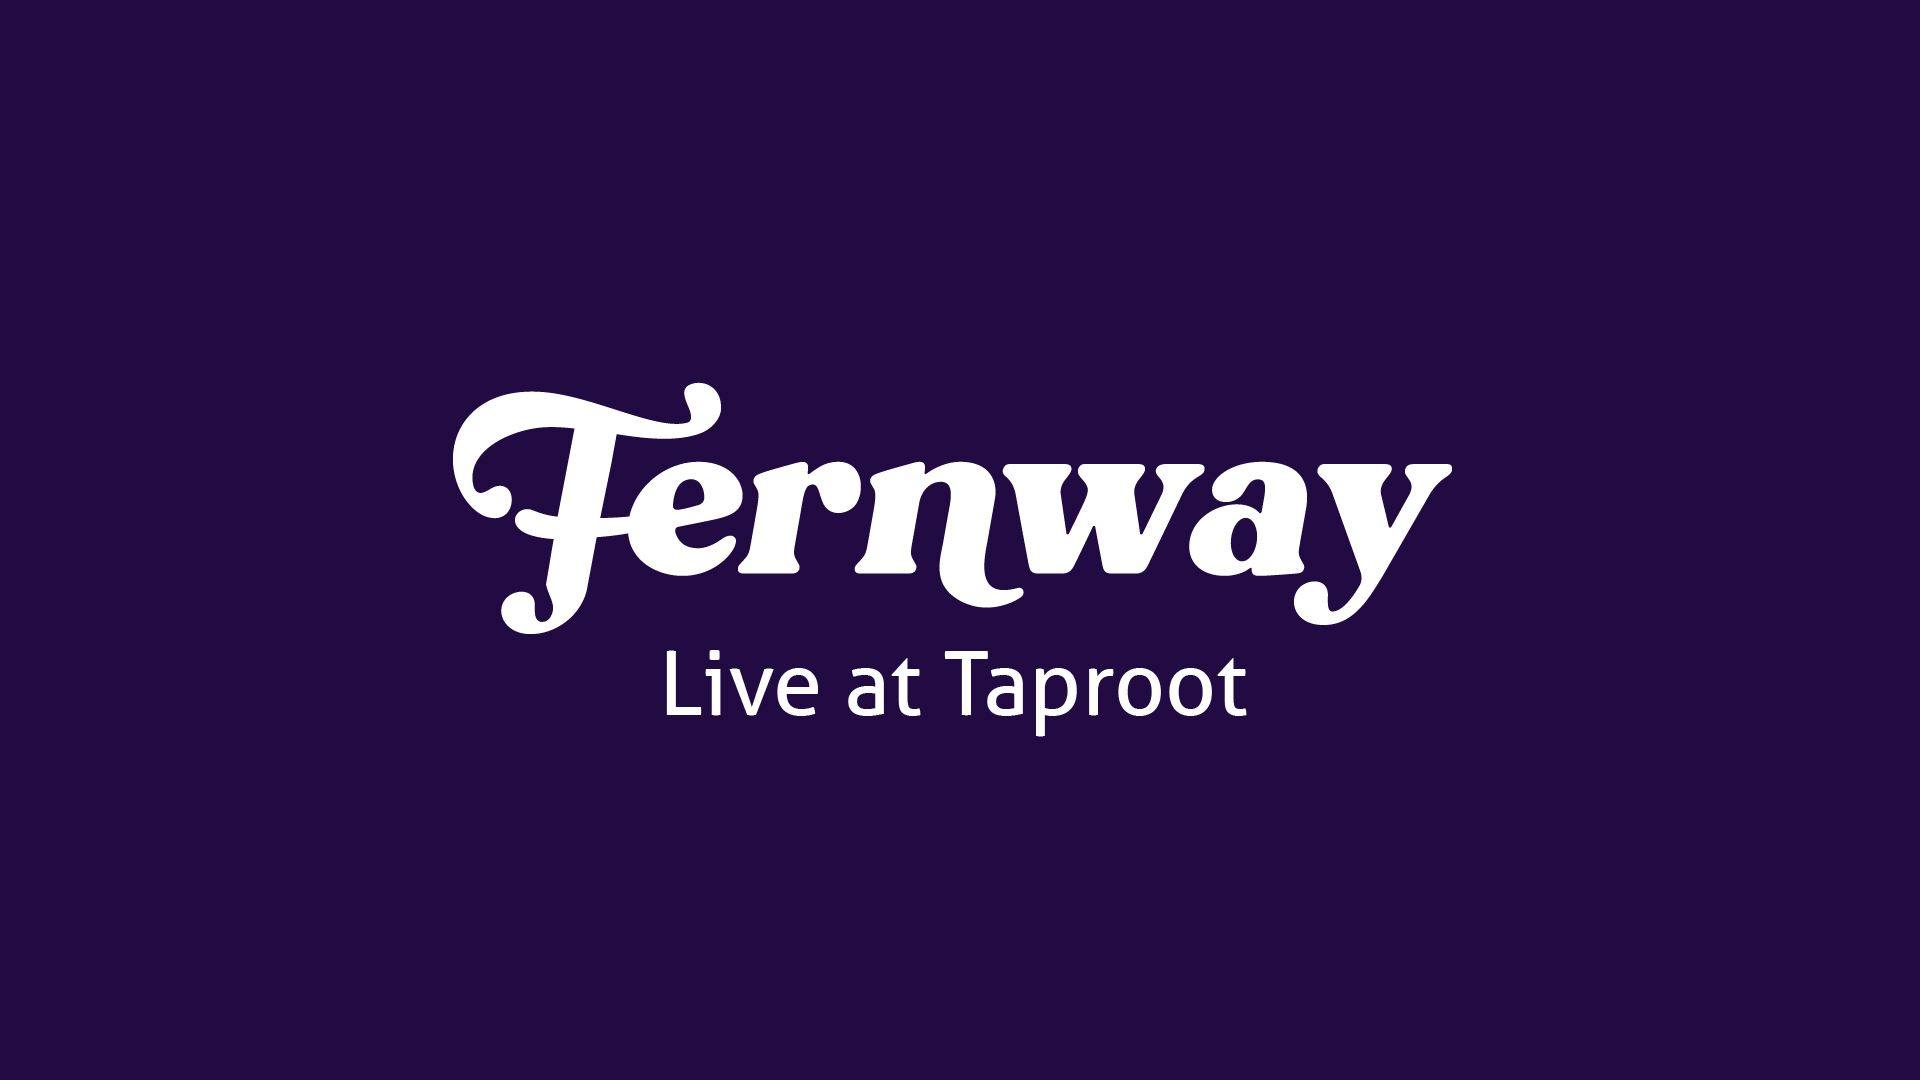 Featured image for “Fernway live at Taproot”